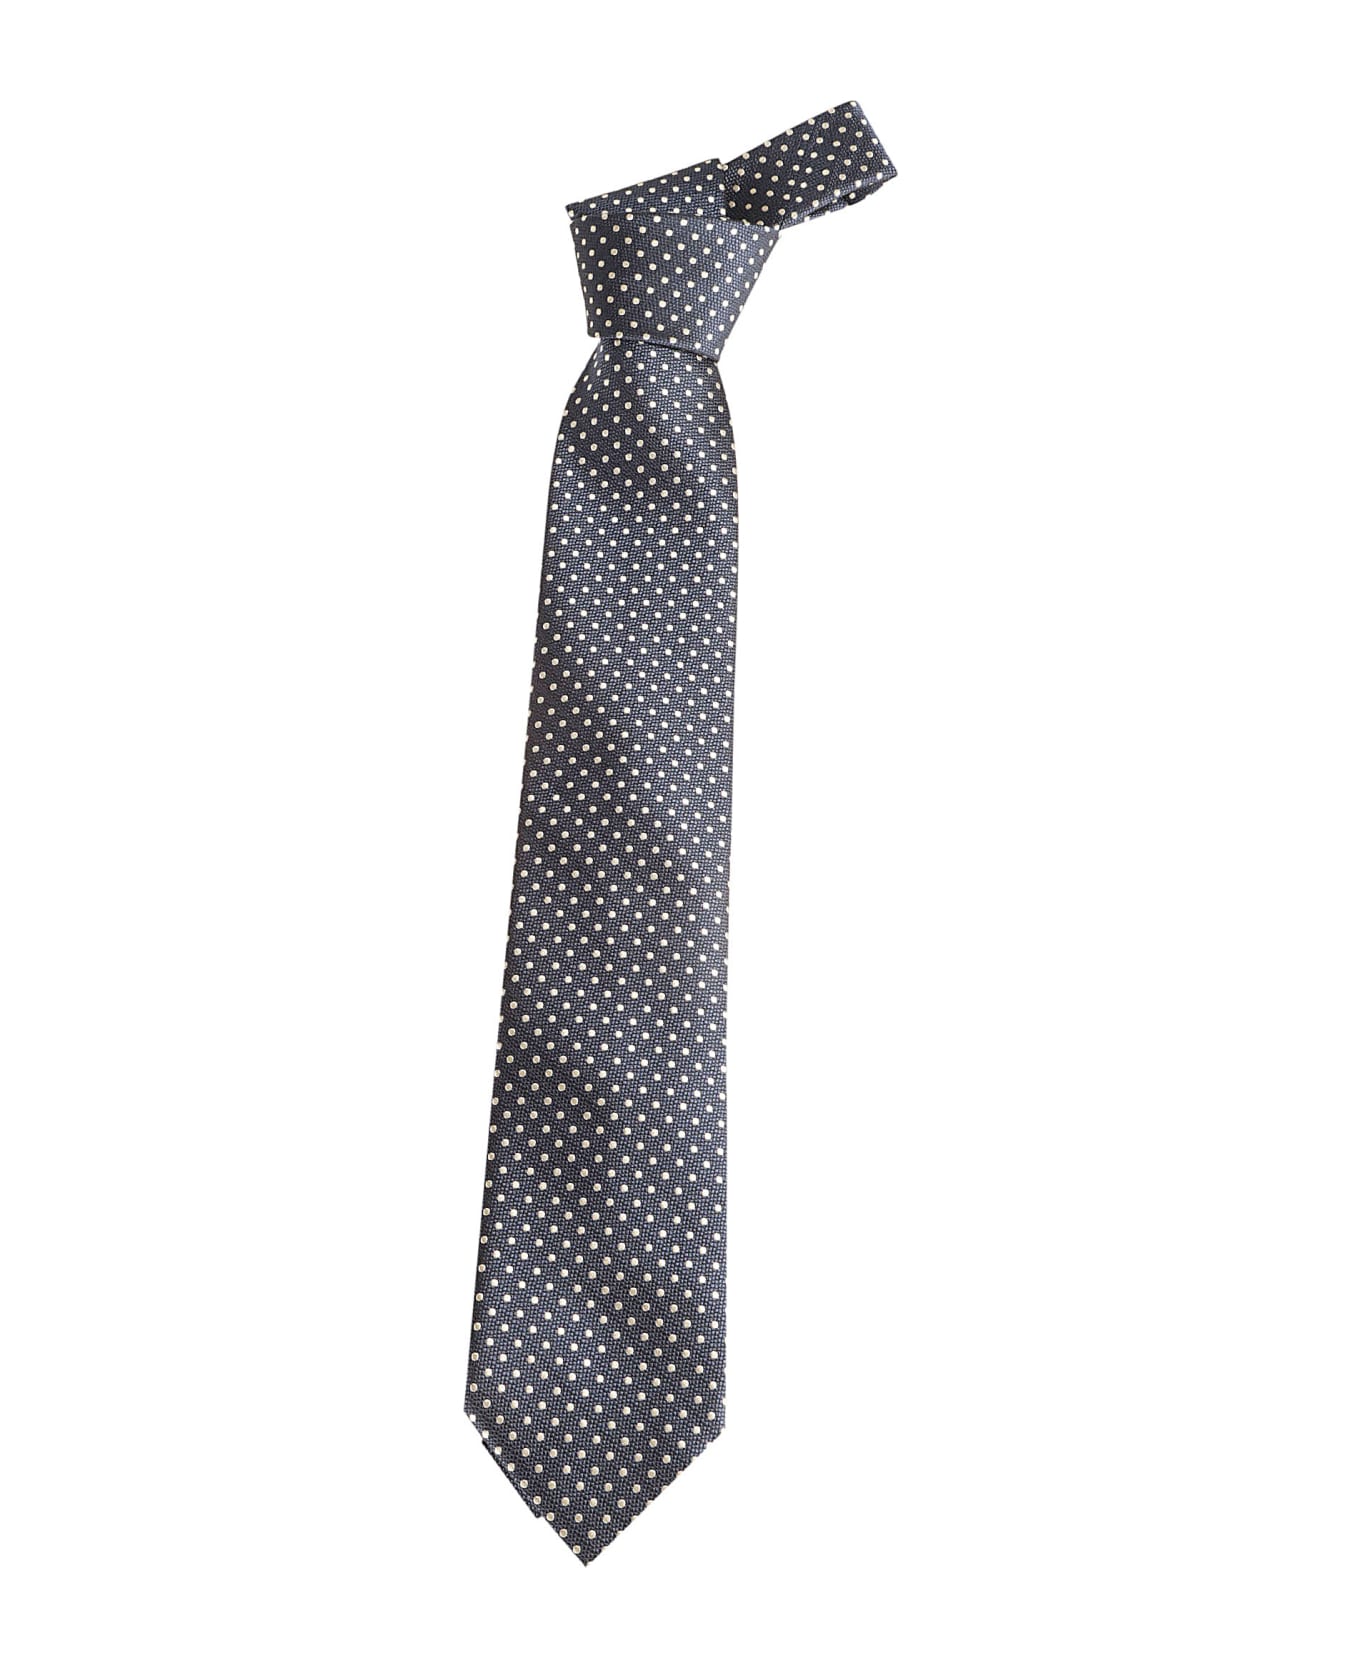 Tom Ford Dotted Print Neck Tie - Ink Blue